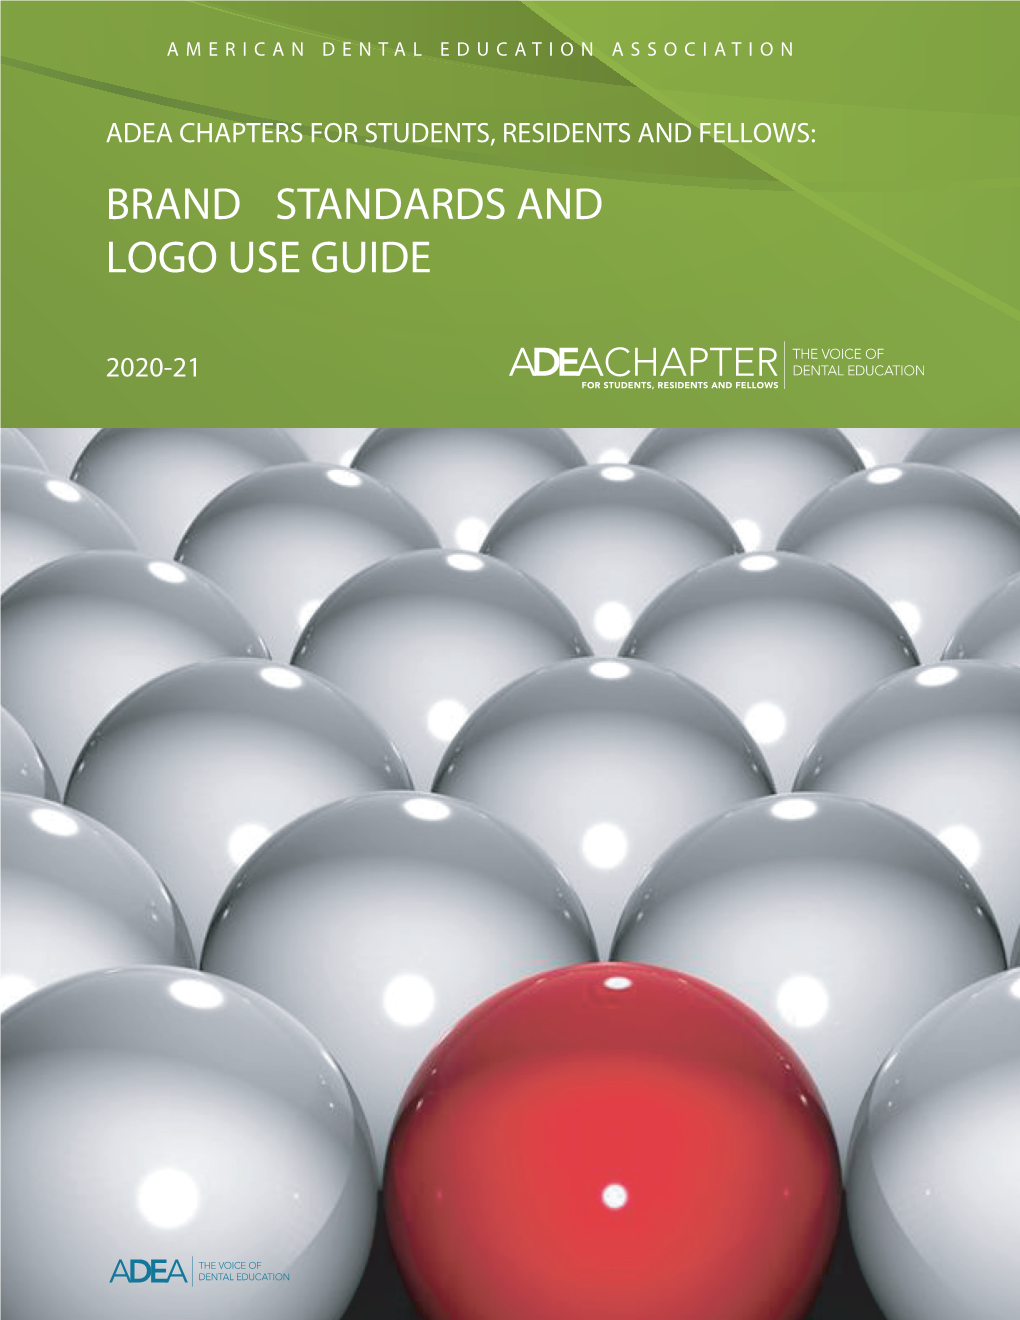 Download the ADEA COSRF: Brand Standards and Logo Use Guide